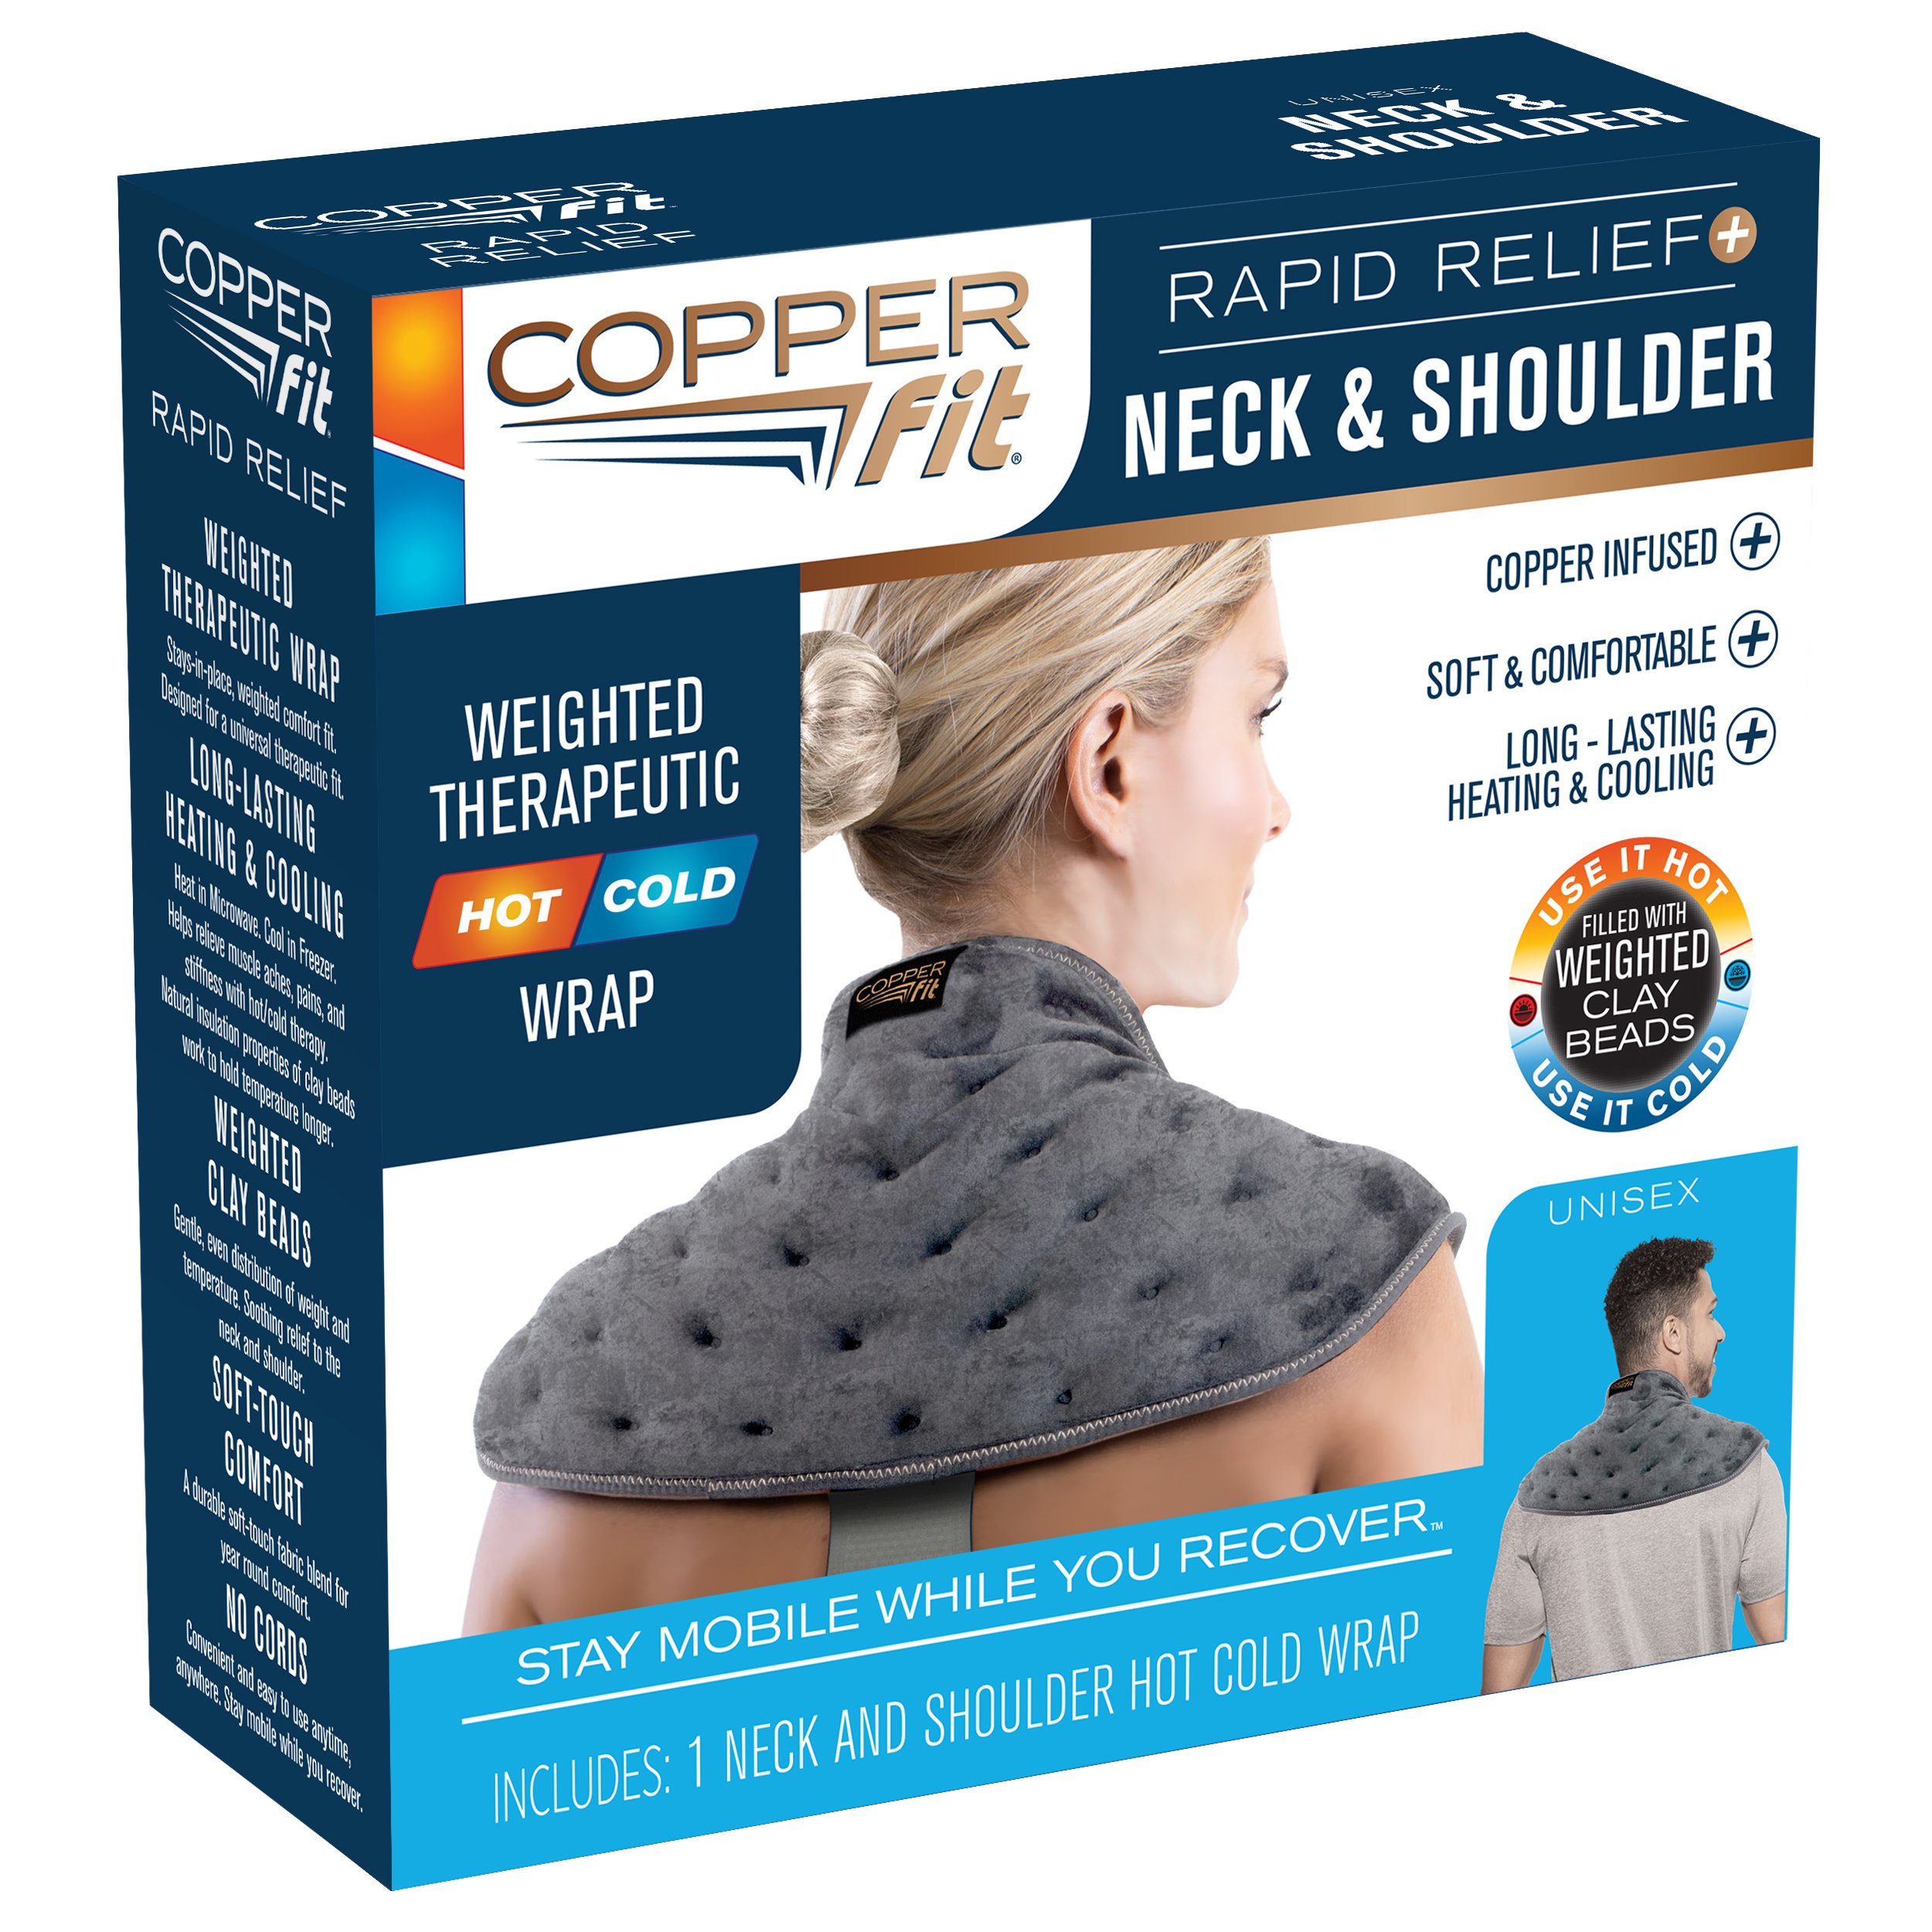 Copper Fit Rapid Relief + Neck & Shoulder Weighted Therapeutic Wrap